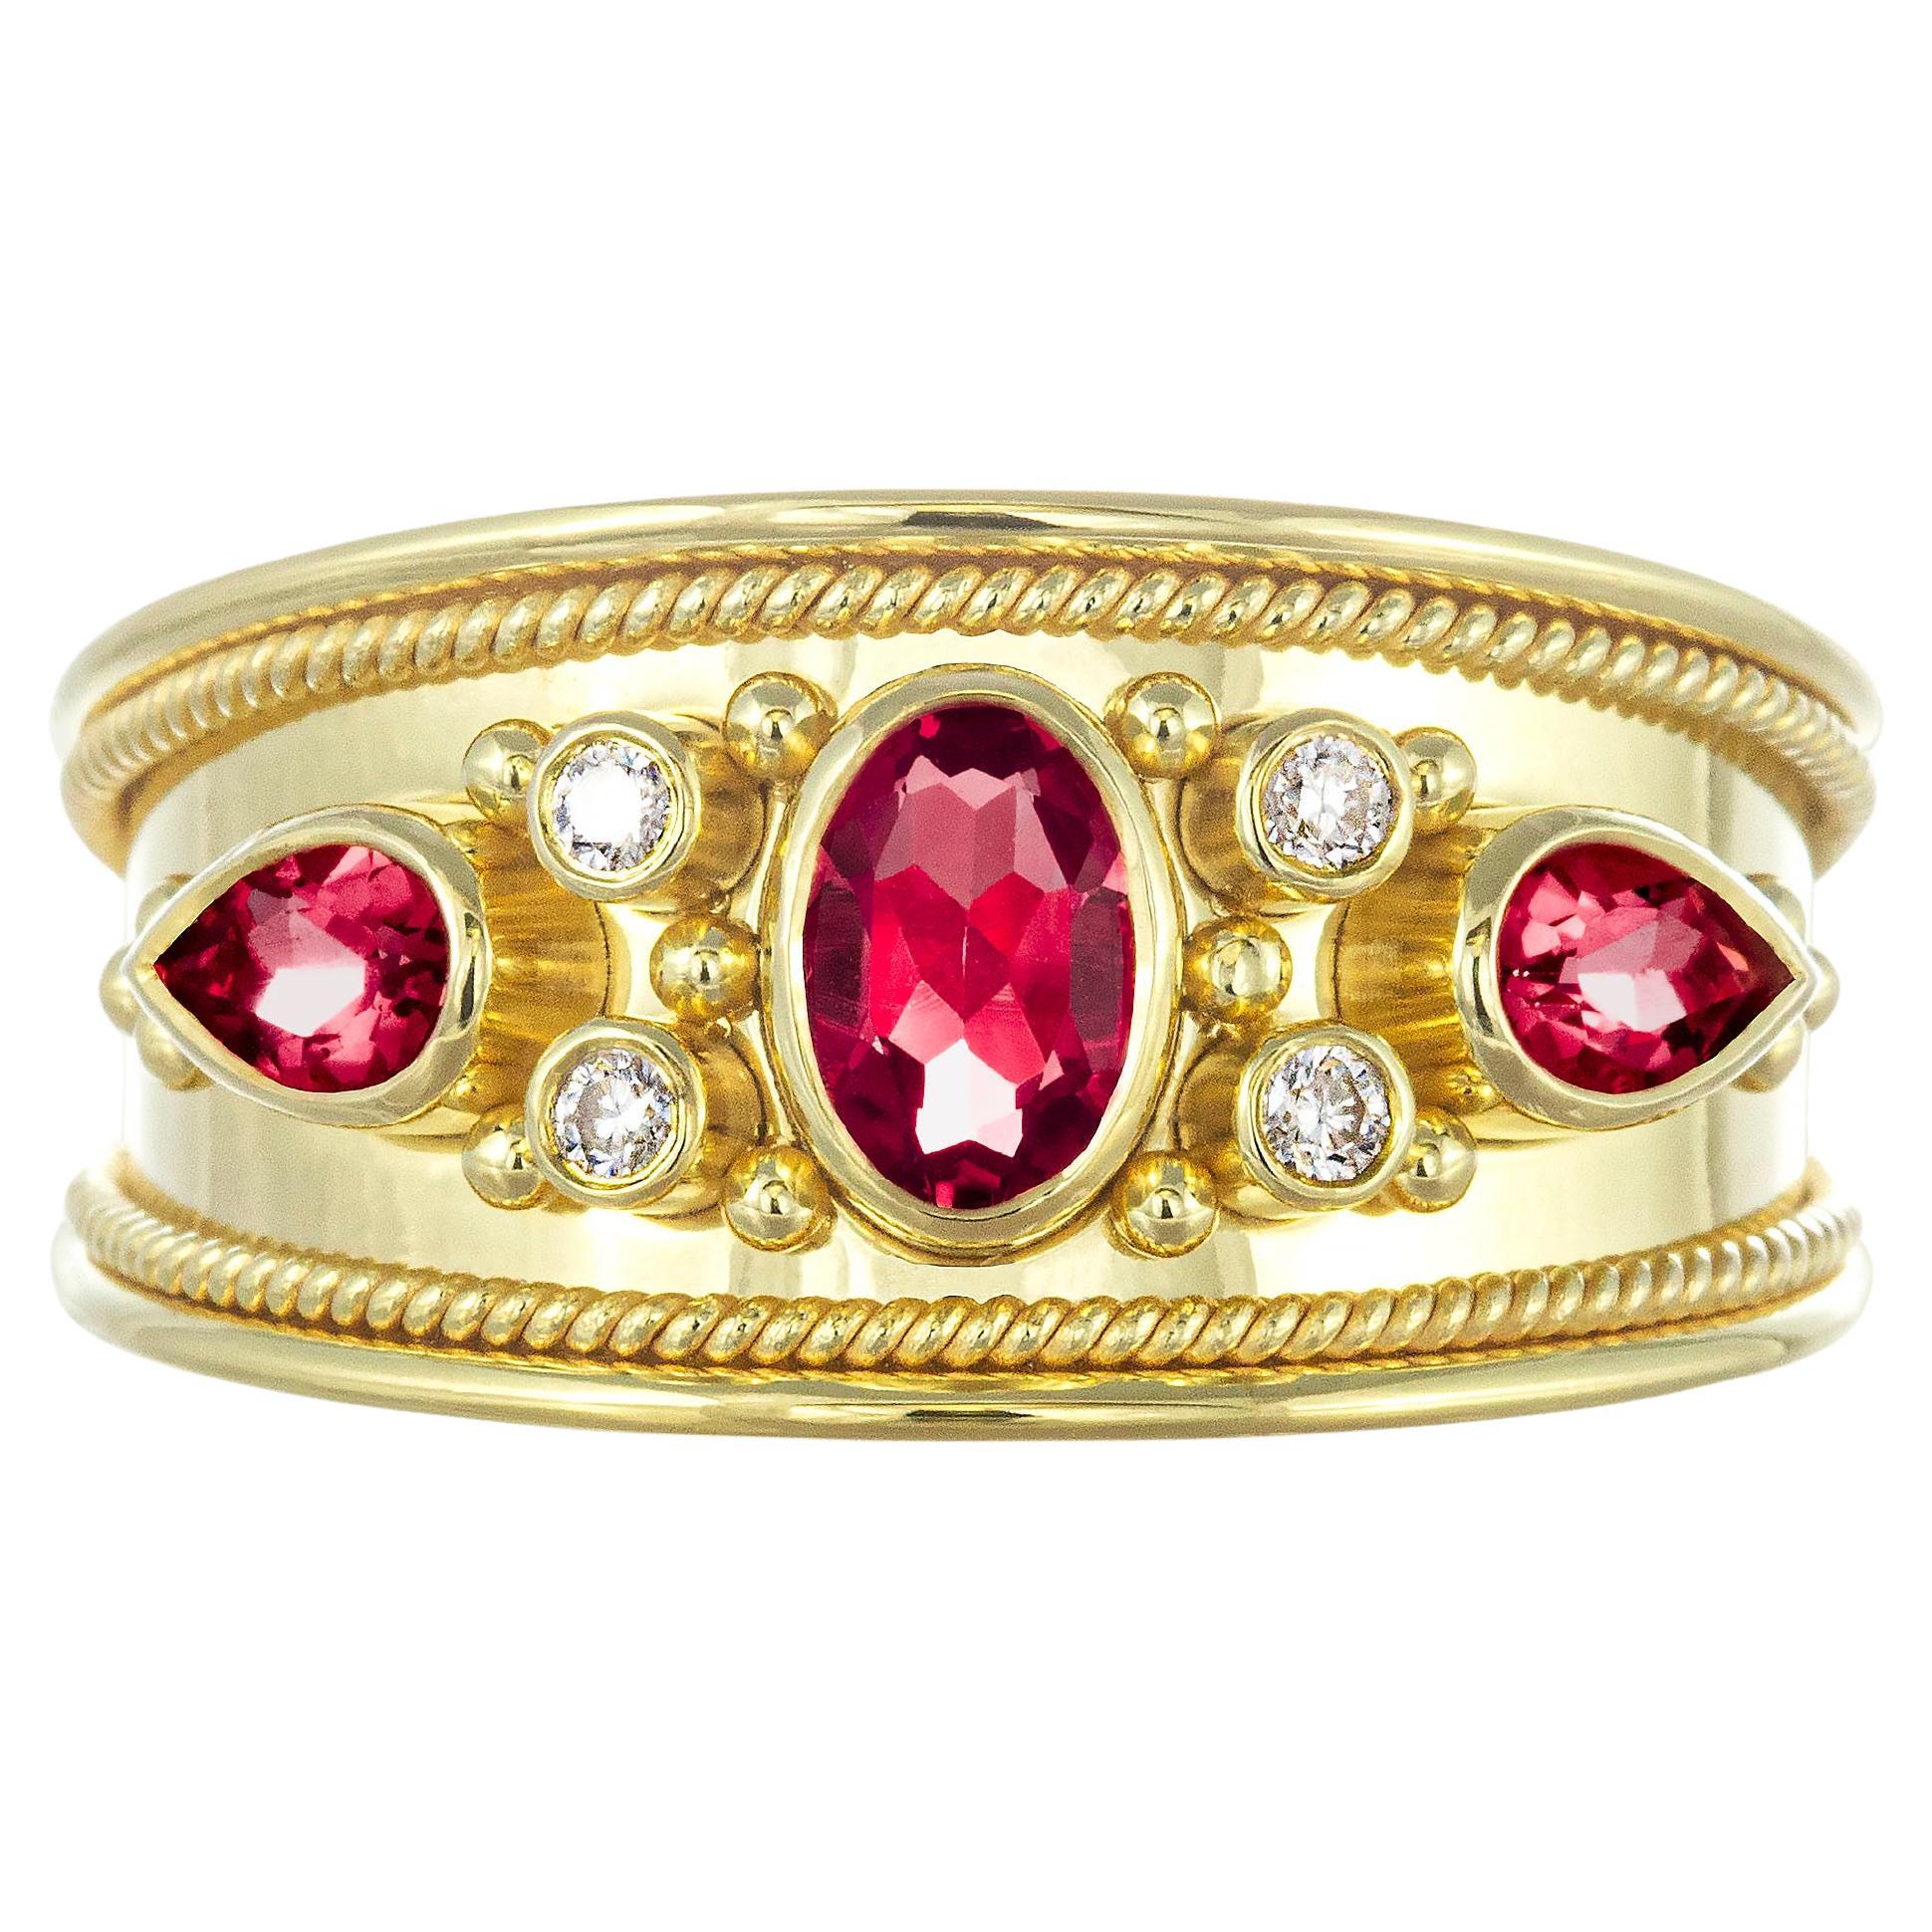 Byzantine Gold Ring with Rubies Diamonds and a Shiny Finish For Sale